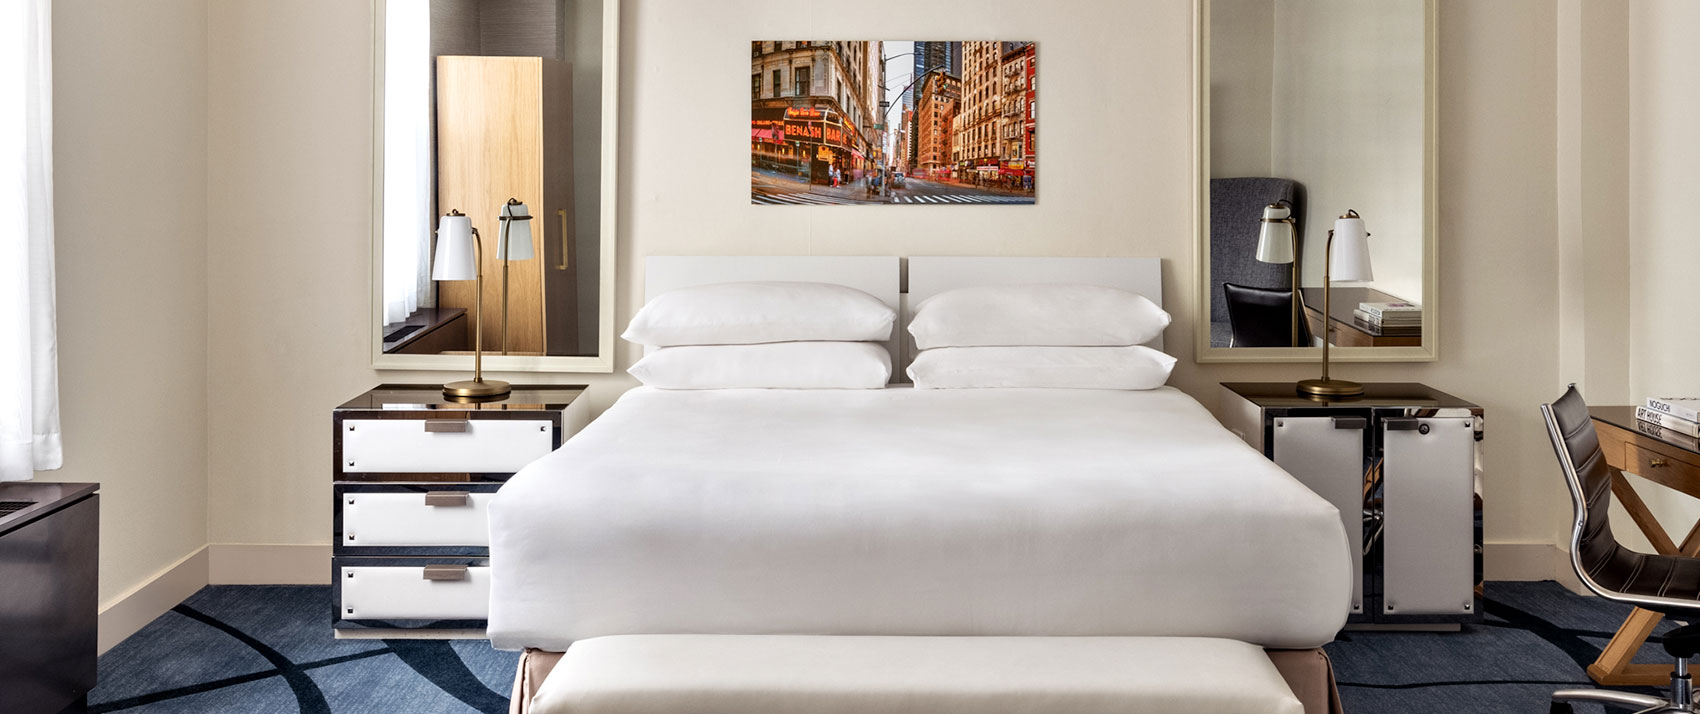 two queen beds in a guestroom at 70 park ave hotel